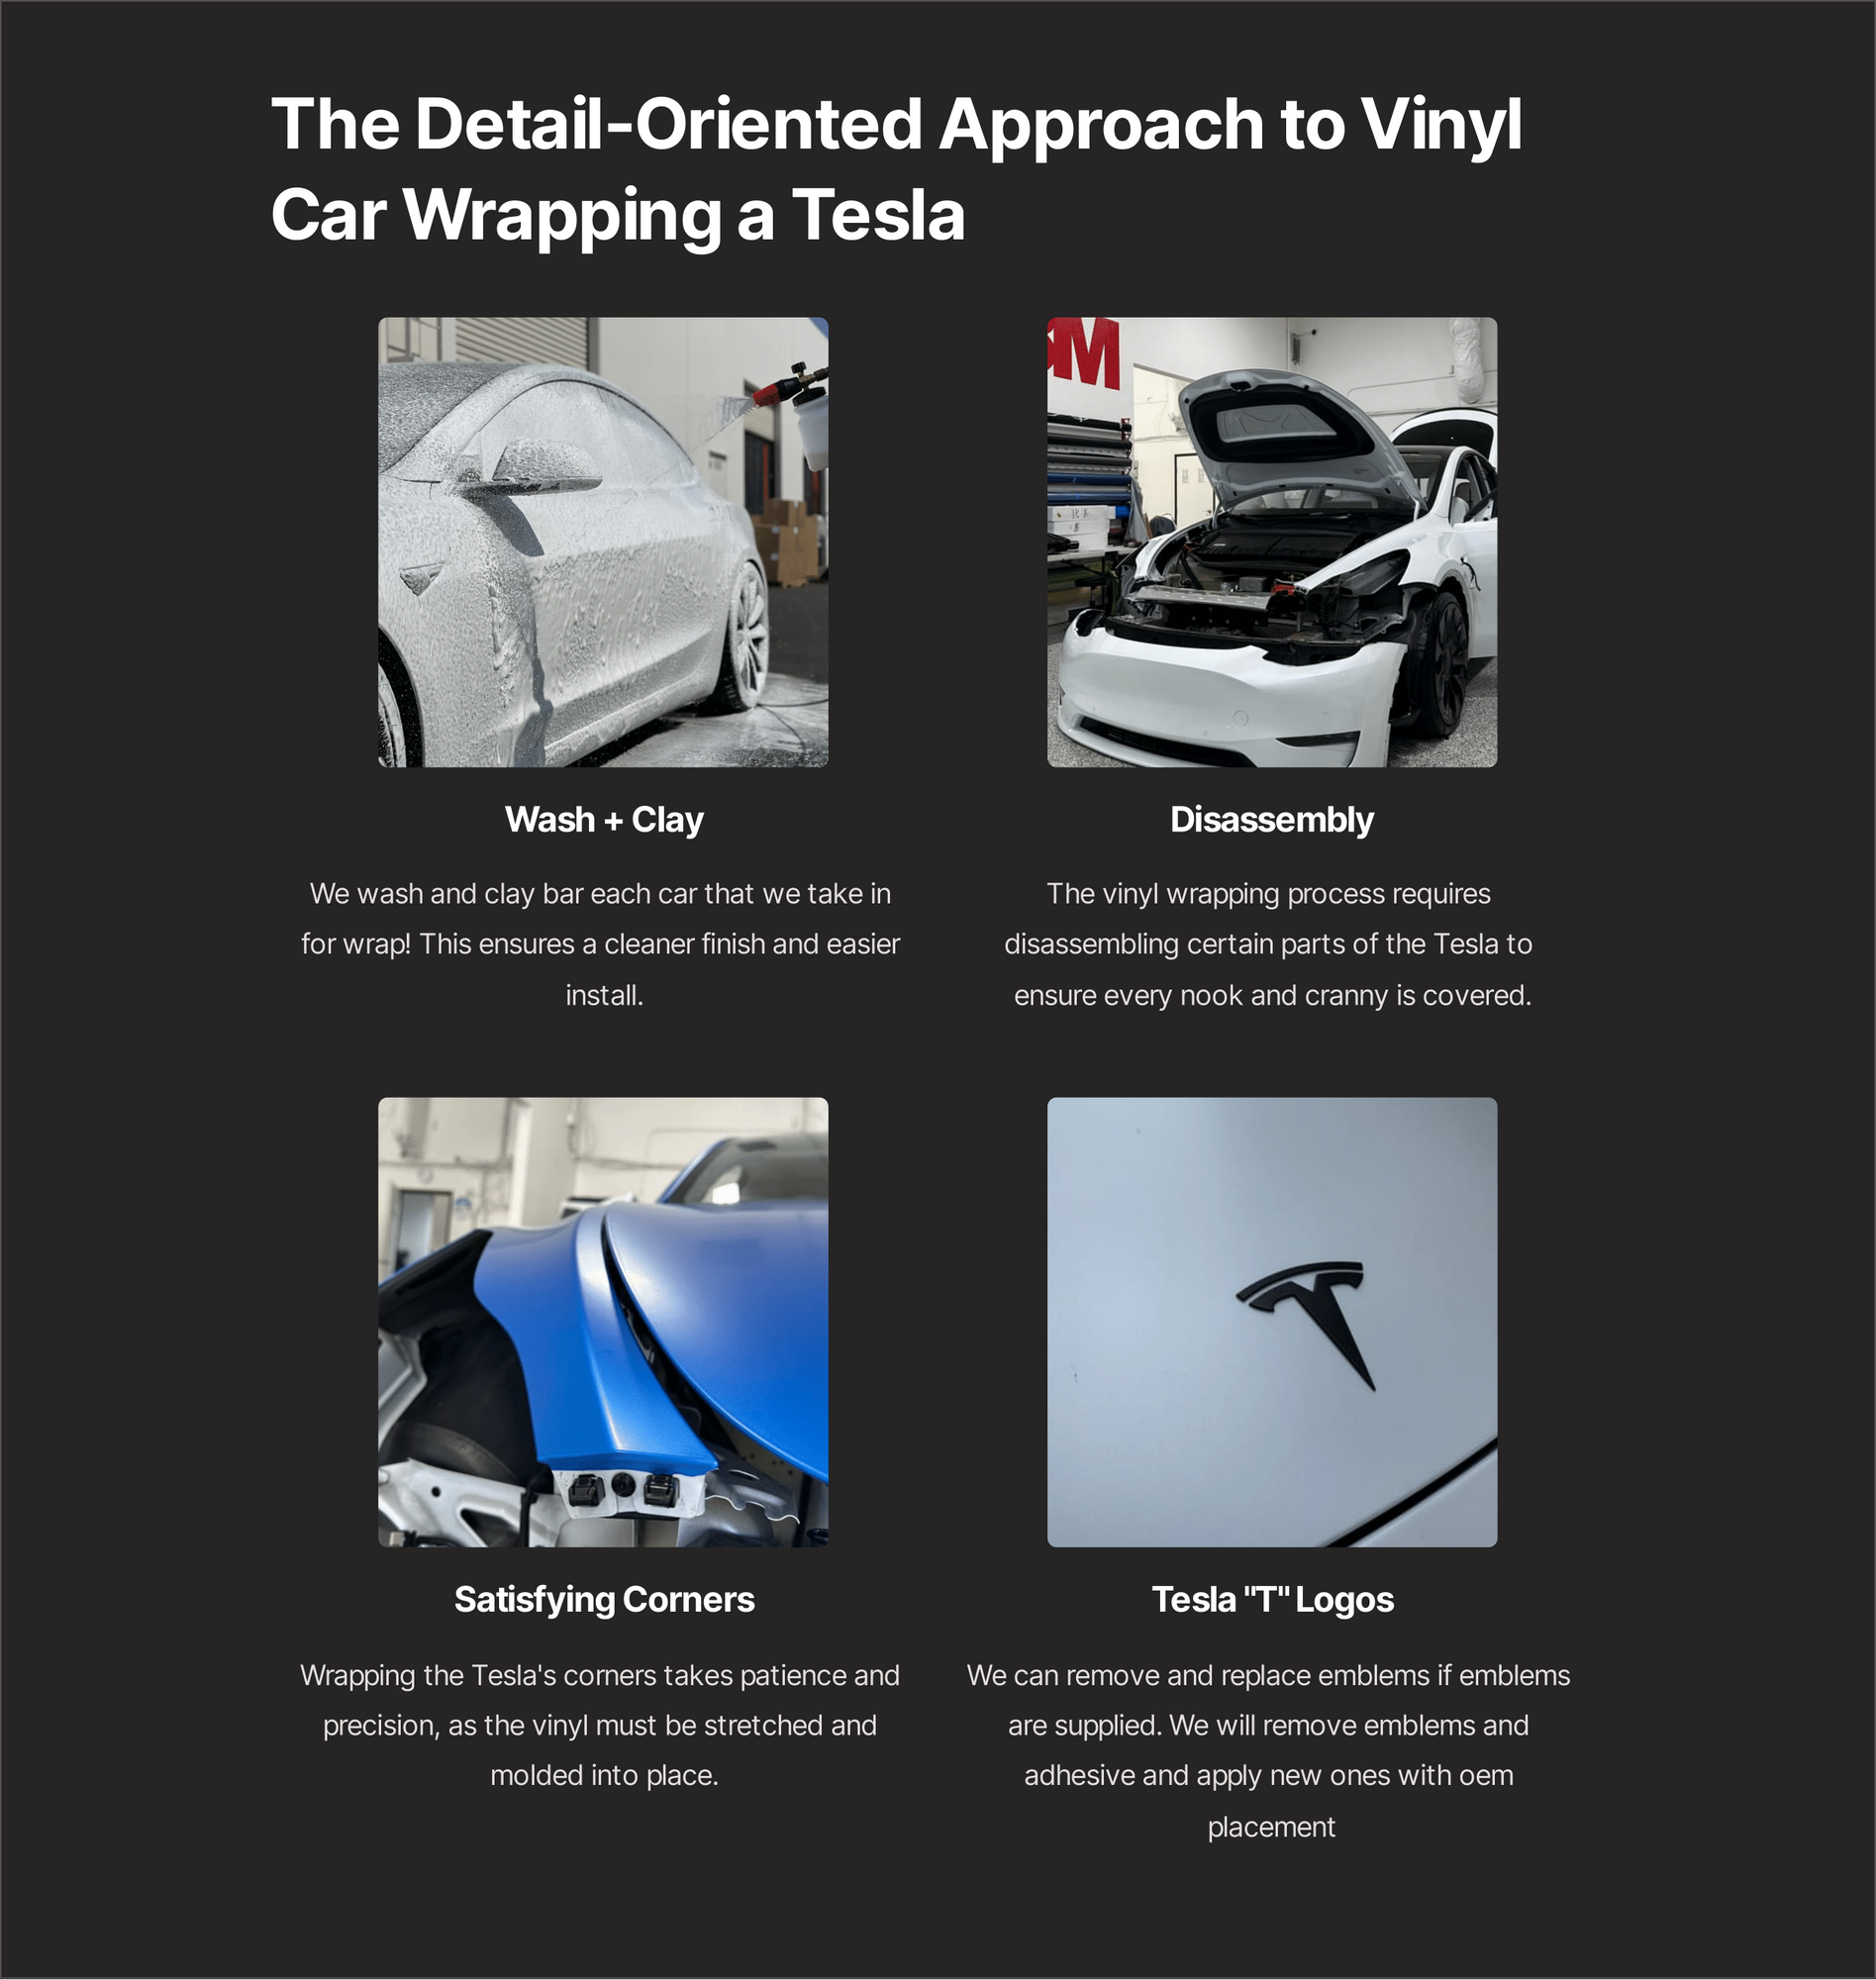 Vinyl-Wrapping-a-Tesla-A-Detail-Oriented-Process (1)-5.png